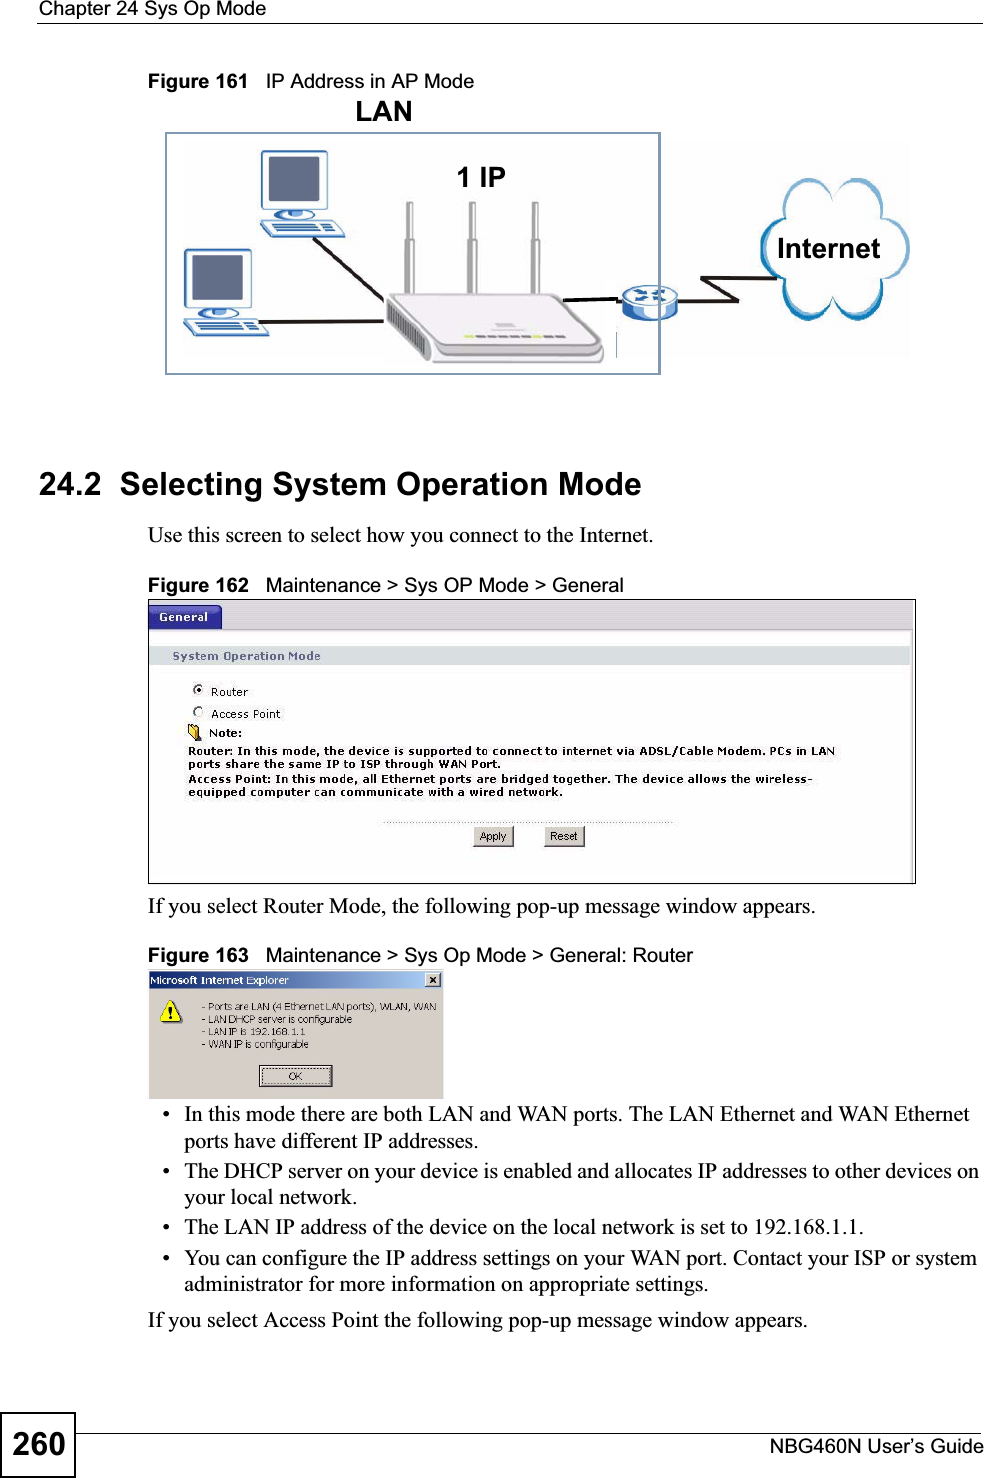 Chapter 24 Sys Op ModeNBG460N User’s Guide260Figure 161   IP Address in AP Mode24.2  Selecting System Operation ModeUse this screen to select how you connect to the Internet. Figure 162   Maintenance &gt; Sys OP Mode &gt; General If you select Router Mode, the following pop-up message window appears.Figure 163   Maintenance &gt; Sys Op Mode &gt; General: Router • In this mode there are both LAN and WAN ports. The LAN Ethernet and WAN Ethernet ports have different IP addresses. • The DHCP server on your device is enabled and allocates IP addresses to other devices on your local network. • The LAN IP address of the device on the local network is set to 192.168.1.1.• You can configure the IP address settings on your WAN port. Contact your ISP or system administrator for more information on appropriate settings.If you select Access Point the following pop-up message window appears.1 IPLANInternet